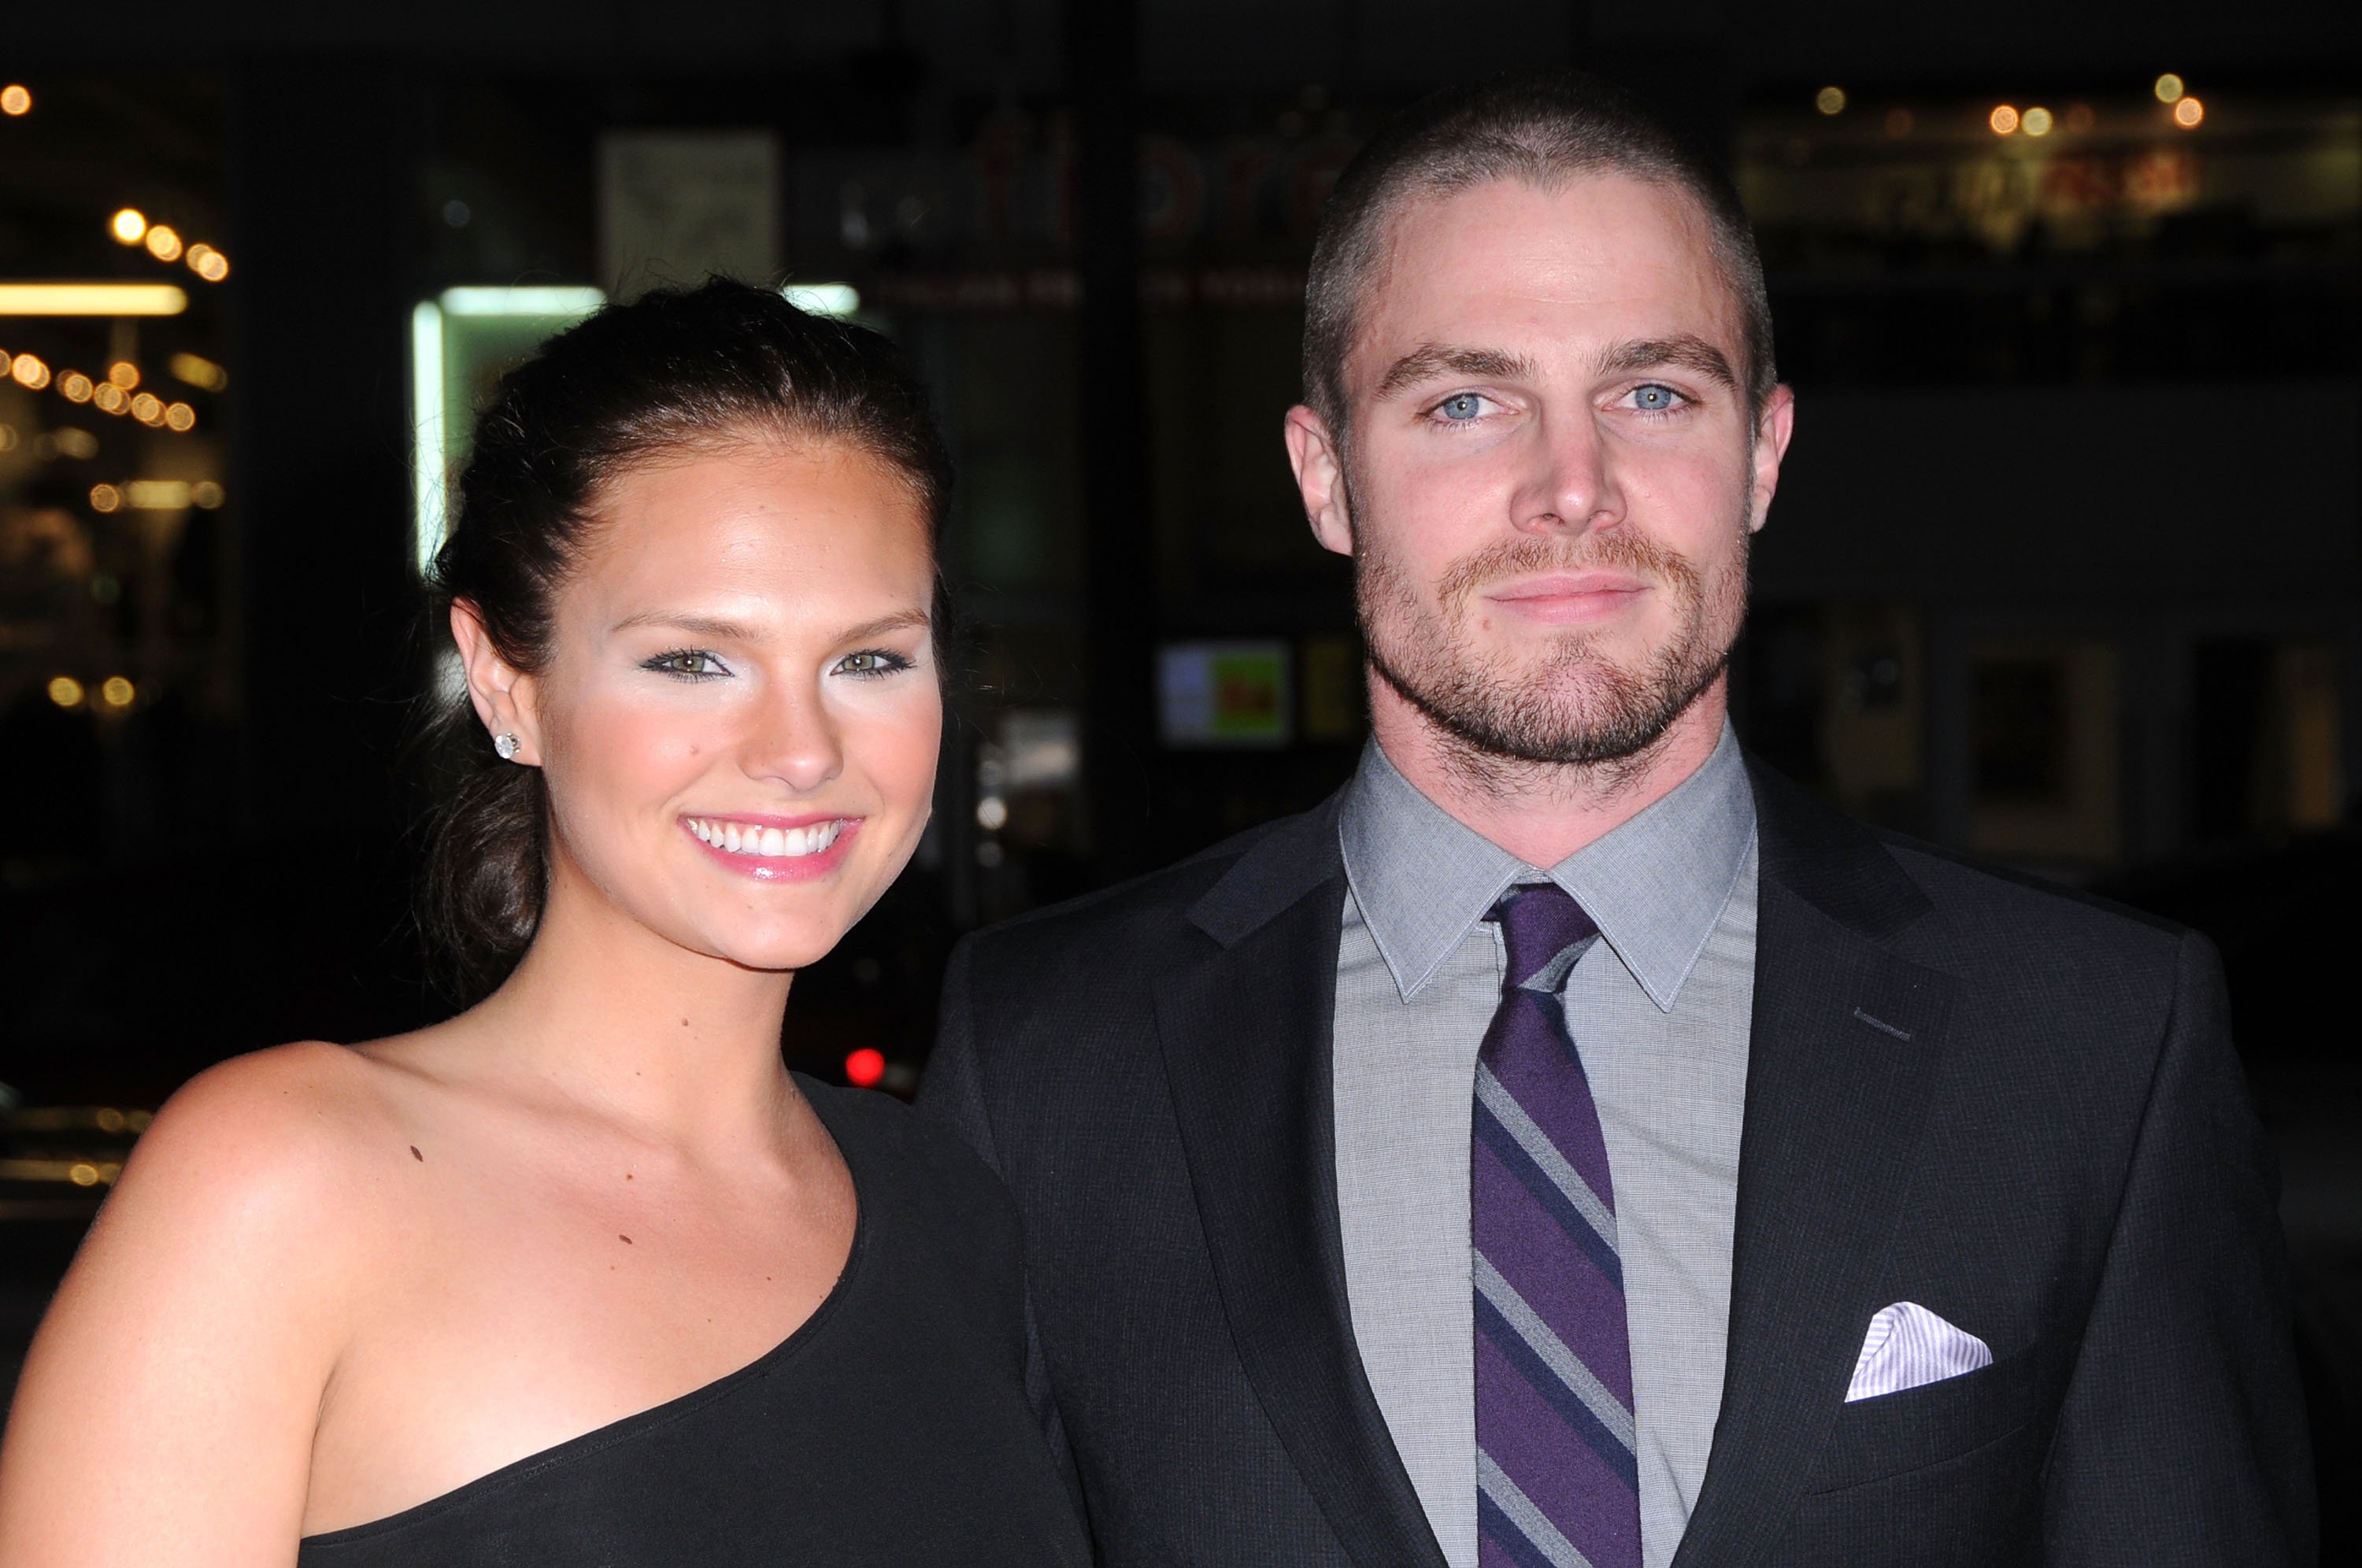 Actor Stephen Amell and Cassandra Jean attend the premiere of HBO's new series 'LUCK' at Grauman's Chinese Theatre on January 25, 2012 in Hollywood, California. | Source: Getty Images